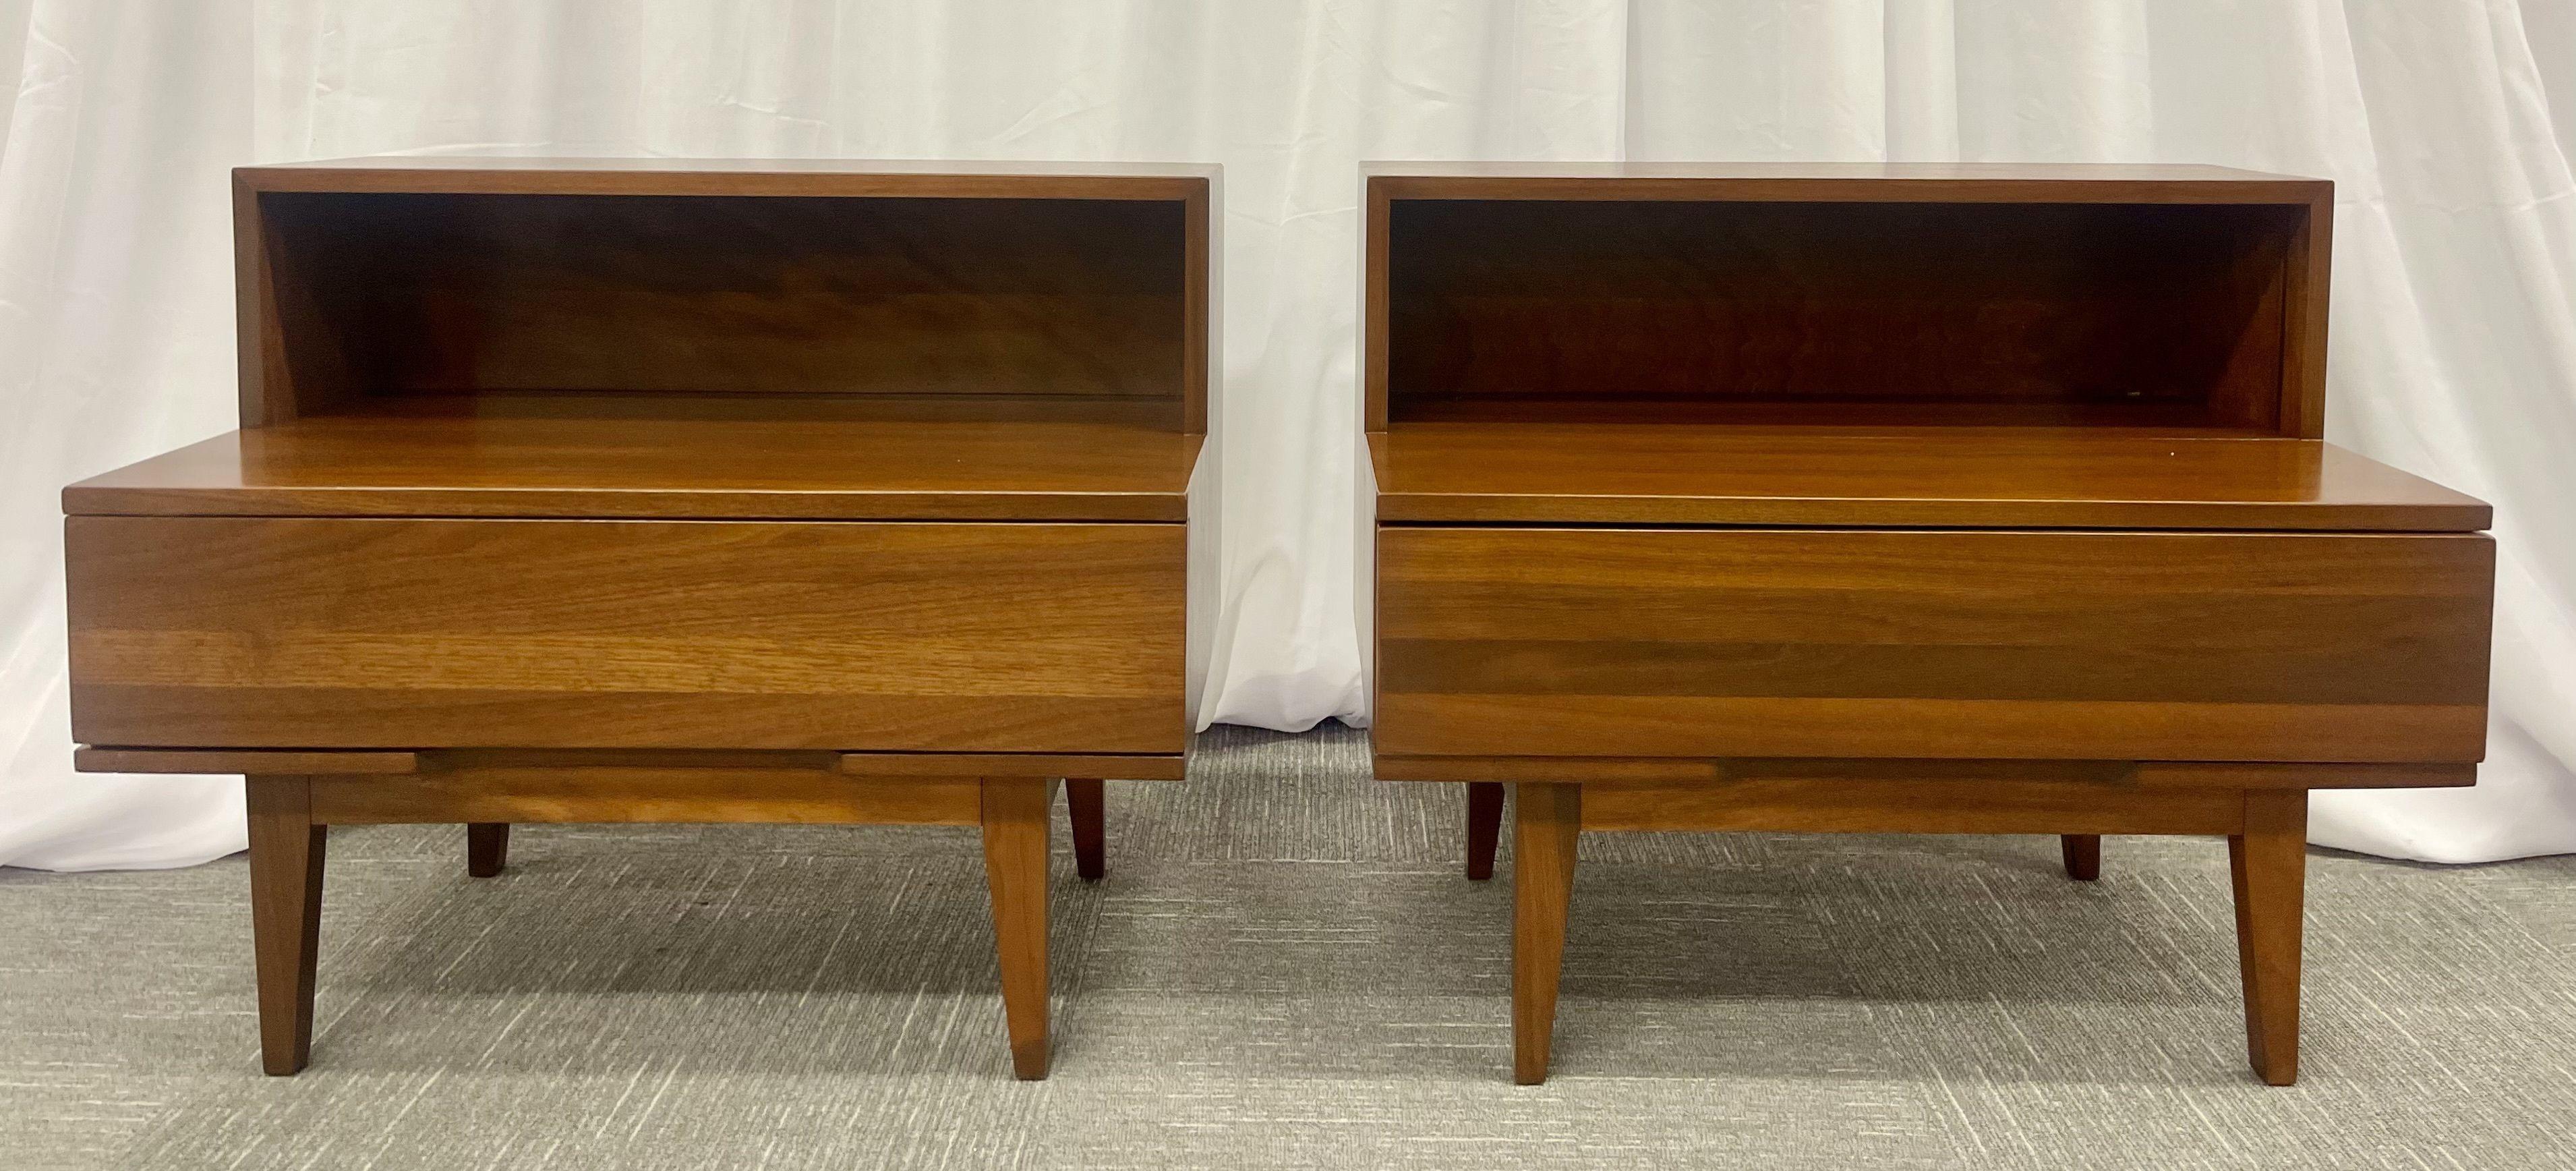 Pair Mid-Century Modern step end tables/nightstands, Nakashima Style, American

Fully refinished set of step nightstands in rosewood. Reminiscent of the work of celebrated woodworker George Nakashima. Each nightstand has one drawer, storage